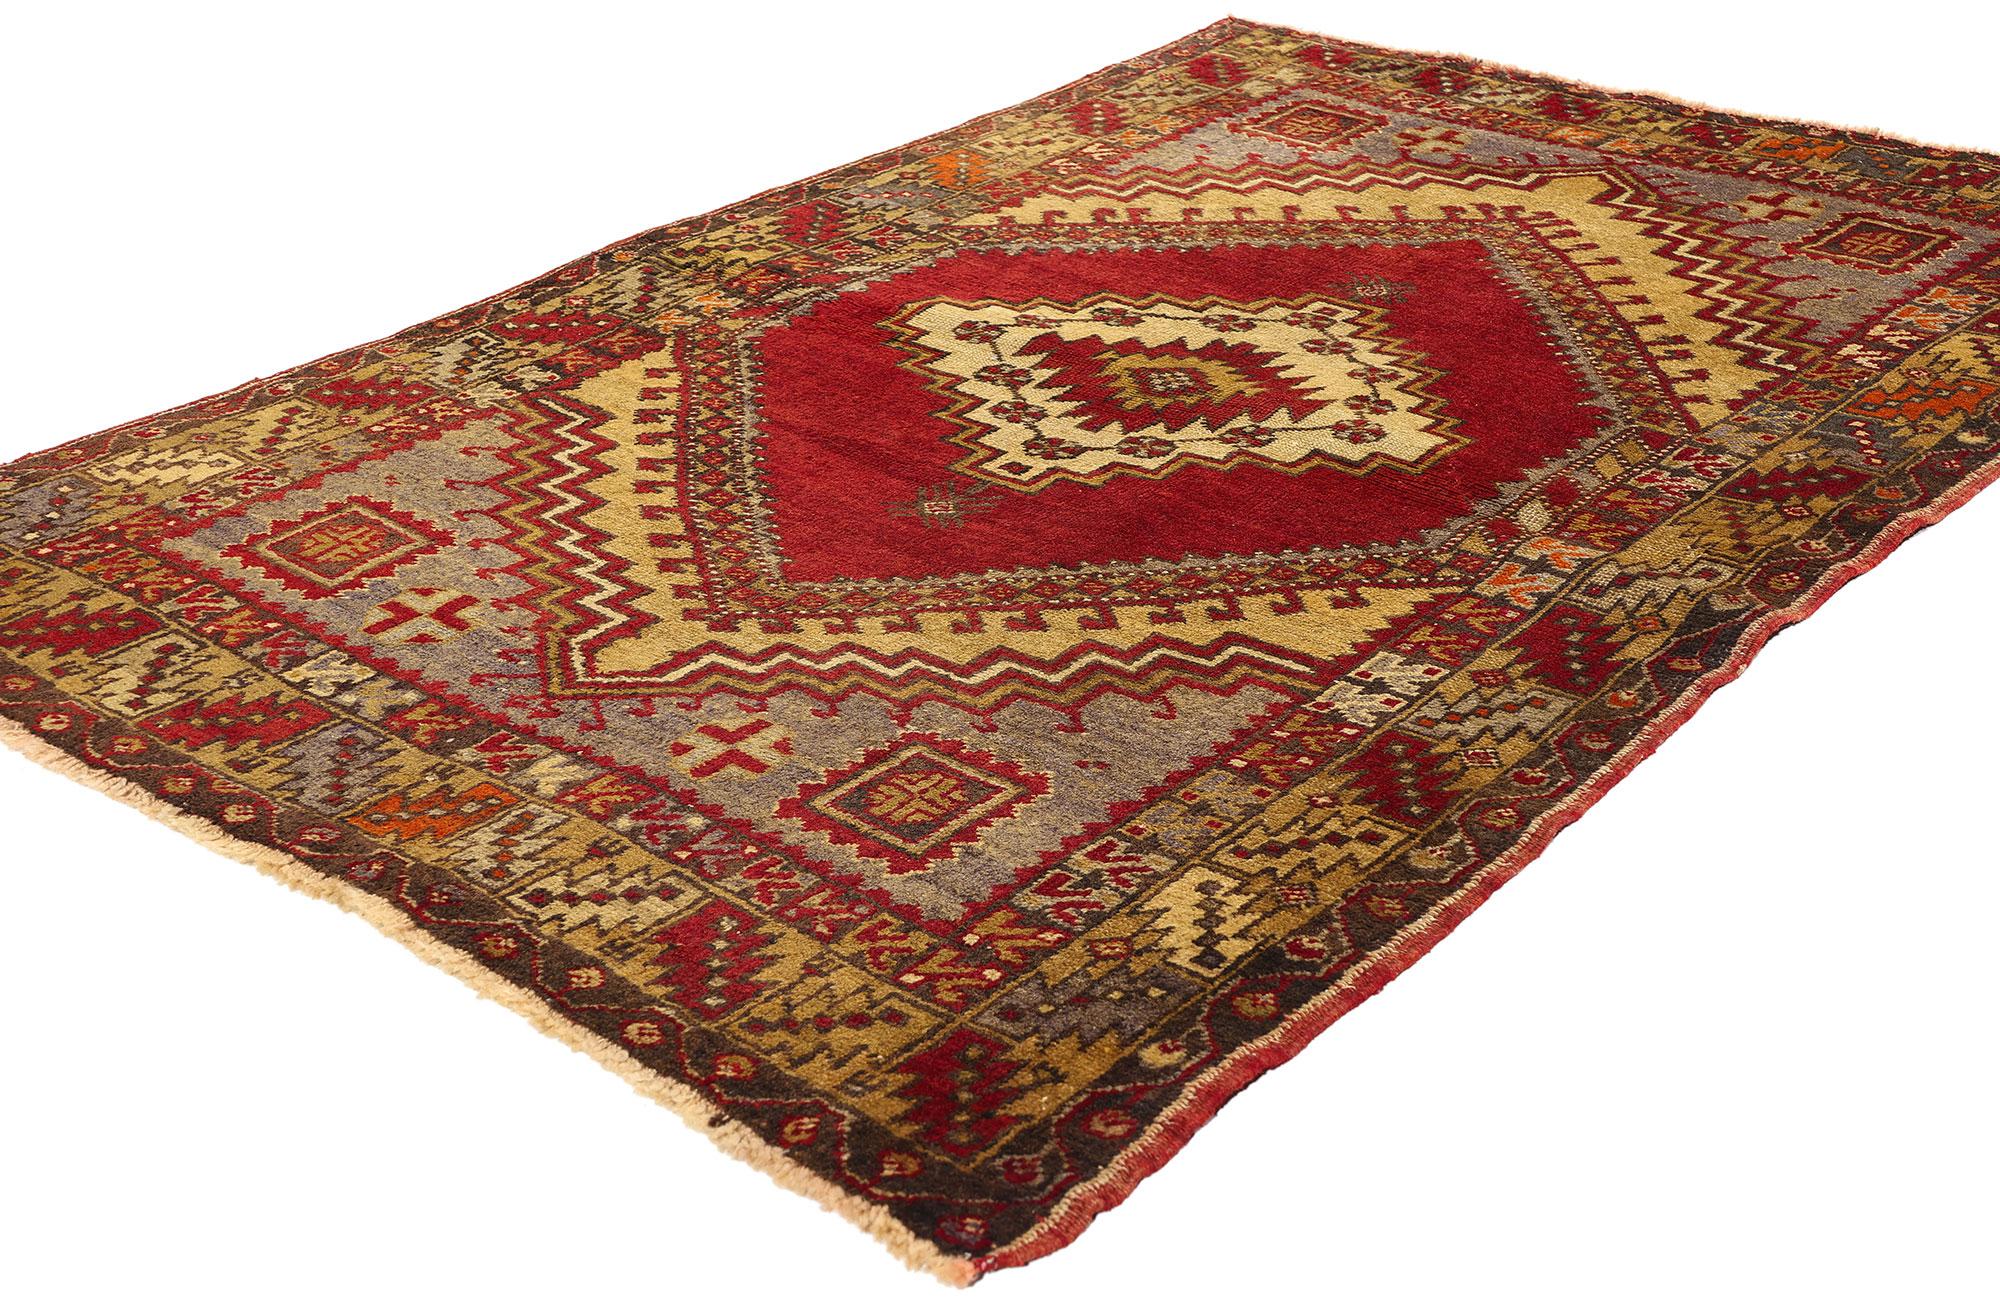 51459 Vintage Turkish Oushak Rug, 03'08 x 05'05. Originating from the Western region of Oushak in Turkey, Turkish Oushak rugs are celebrated for their intricate patterns, calming color palettes, and luxurious wool materials. With a legacy dating